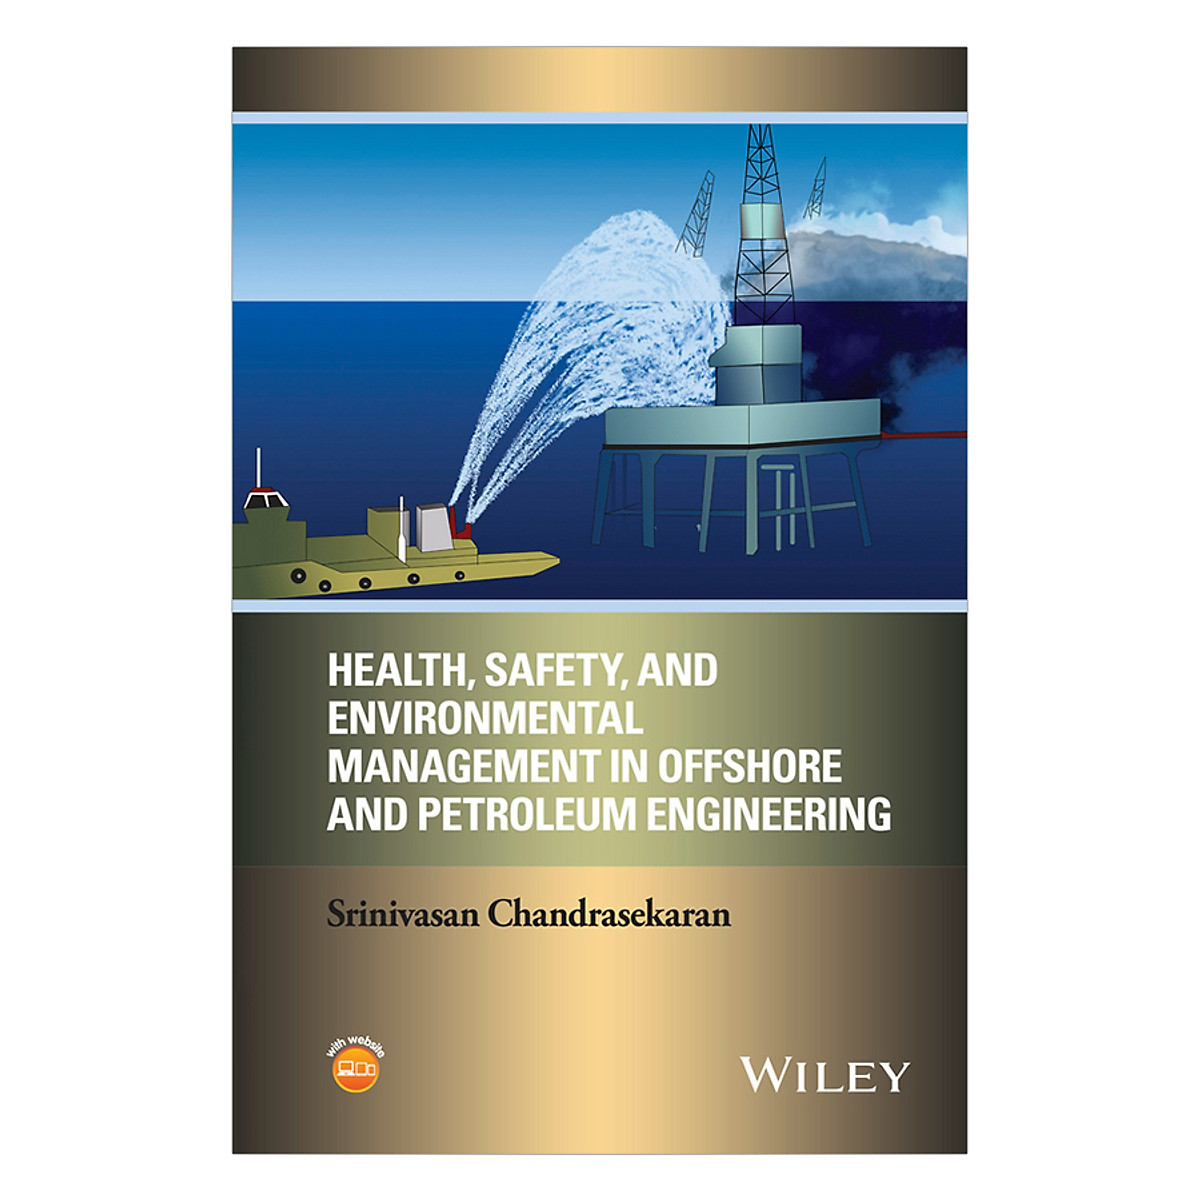 Health, Safety, And Environmental Management In Offshore And Petroleum Engineering